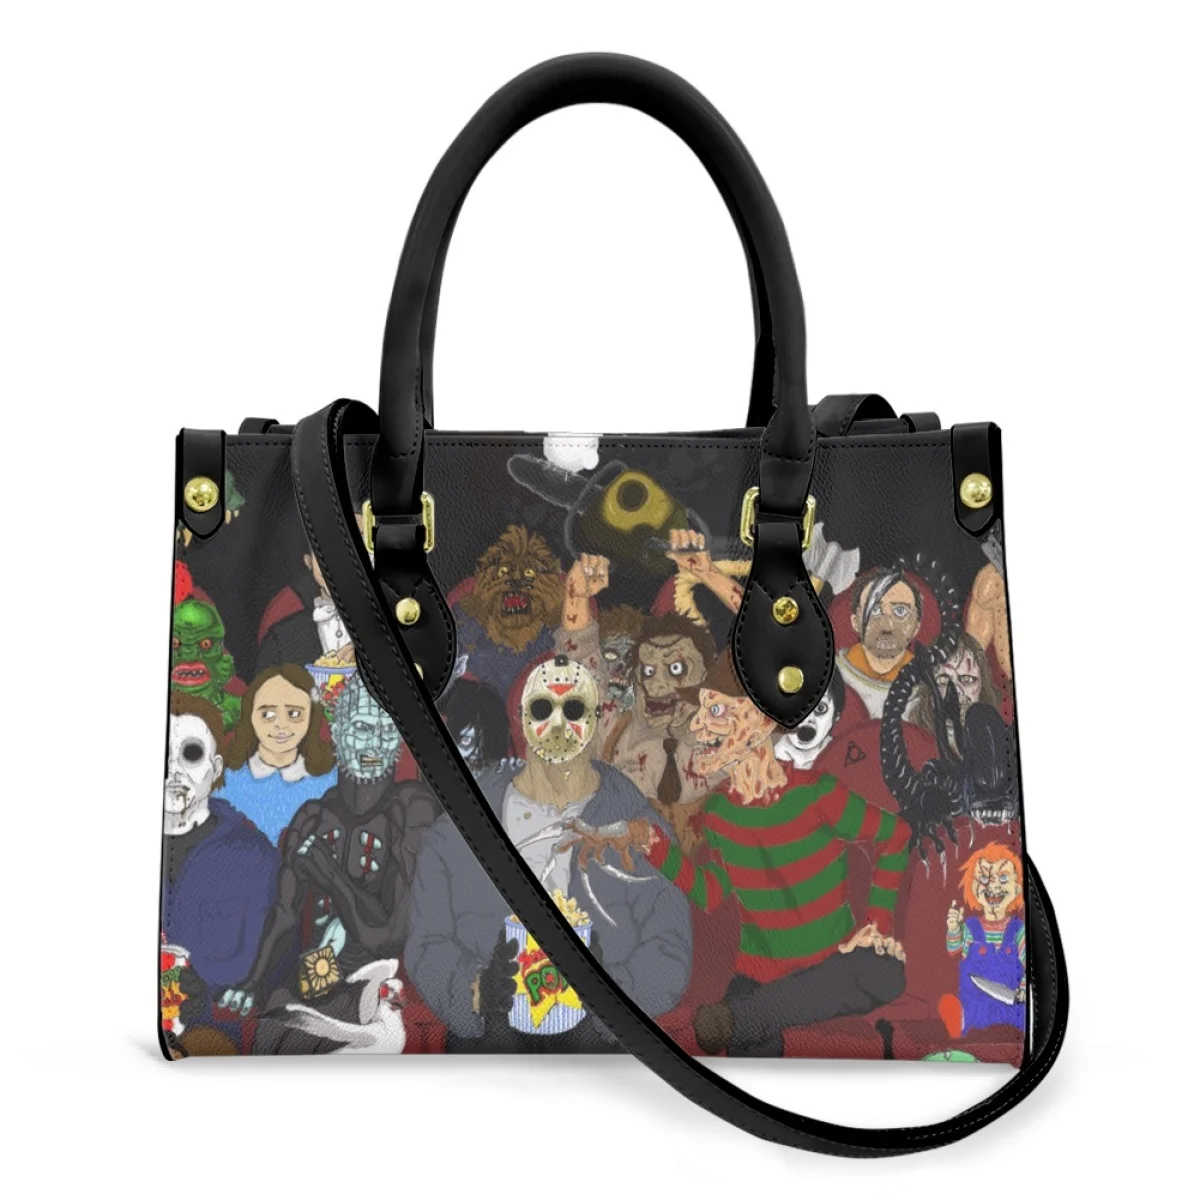 

FORUDESIGNS Thriller TV Series Handbags Ladies Cartoon Horror Puppet Tote Bags Leather PU Hand Bag Travel Shopping Utility